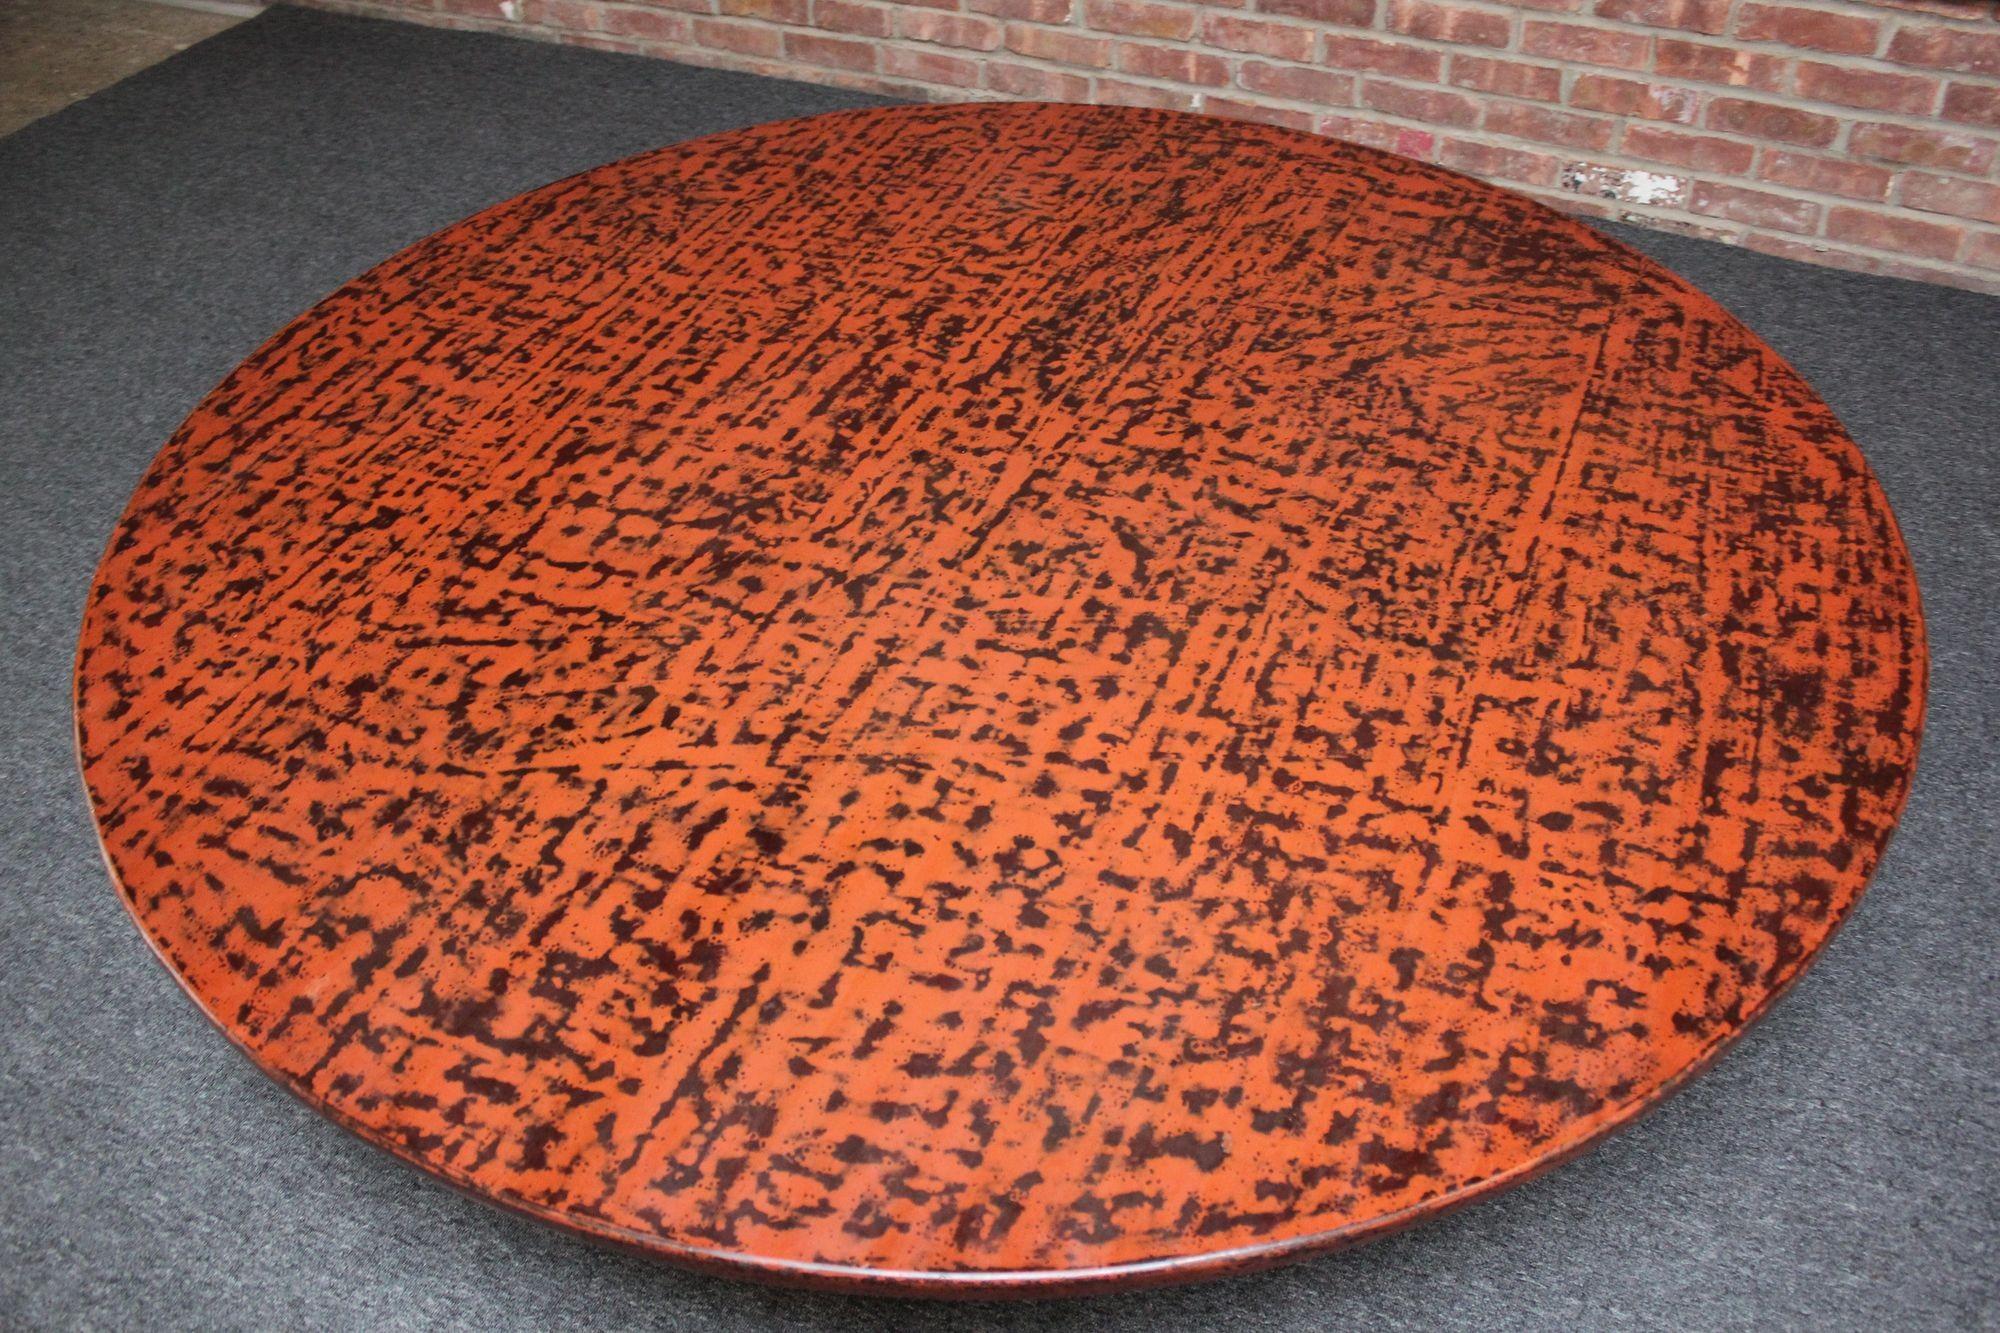 Heavy, large and low round tea/coffee table in the Taishō-Style in negoro lacquer (orange/coral surface rubbed to reveal an underlying layer of black) - ca. mid 1920s-1930s, Japan.
Supported by an 'x' stretcher base with four large, thick